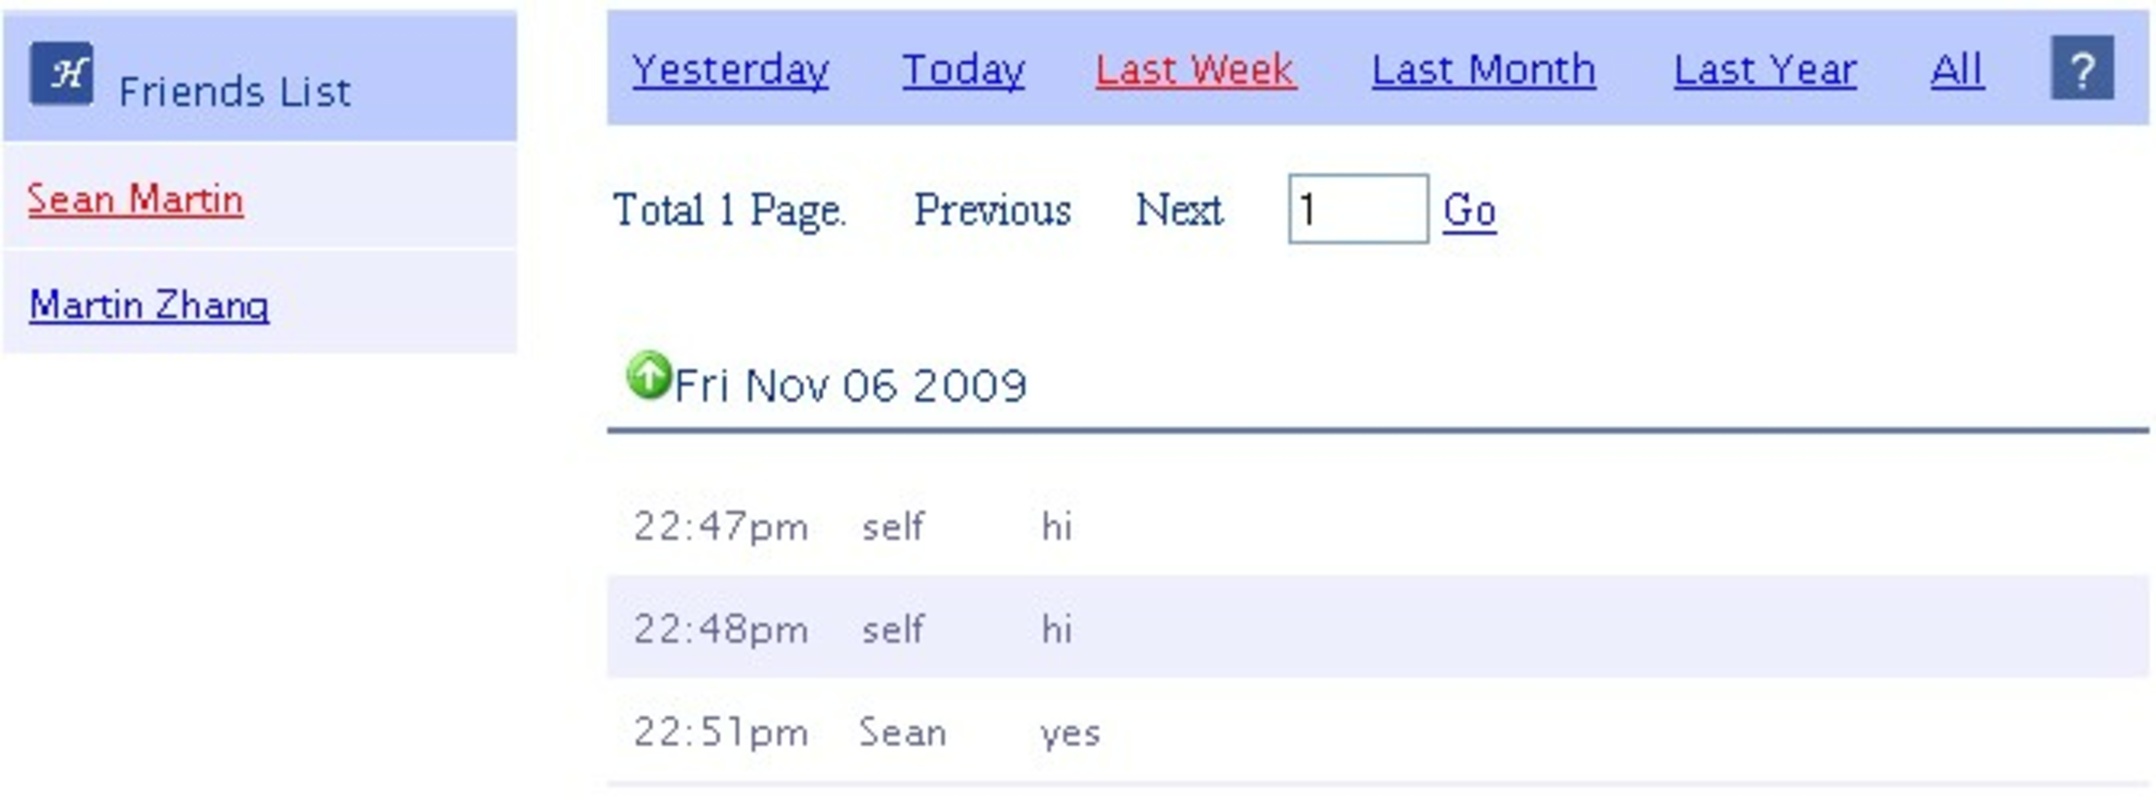 Facebook Chat History Manager 1.5 for Windows Screenshot 1